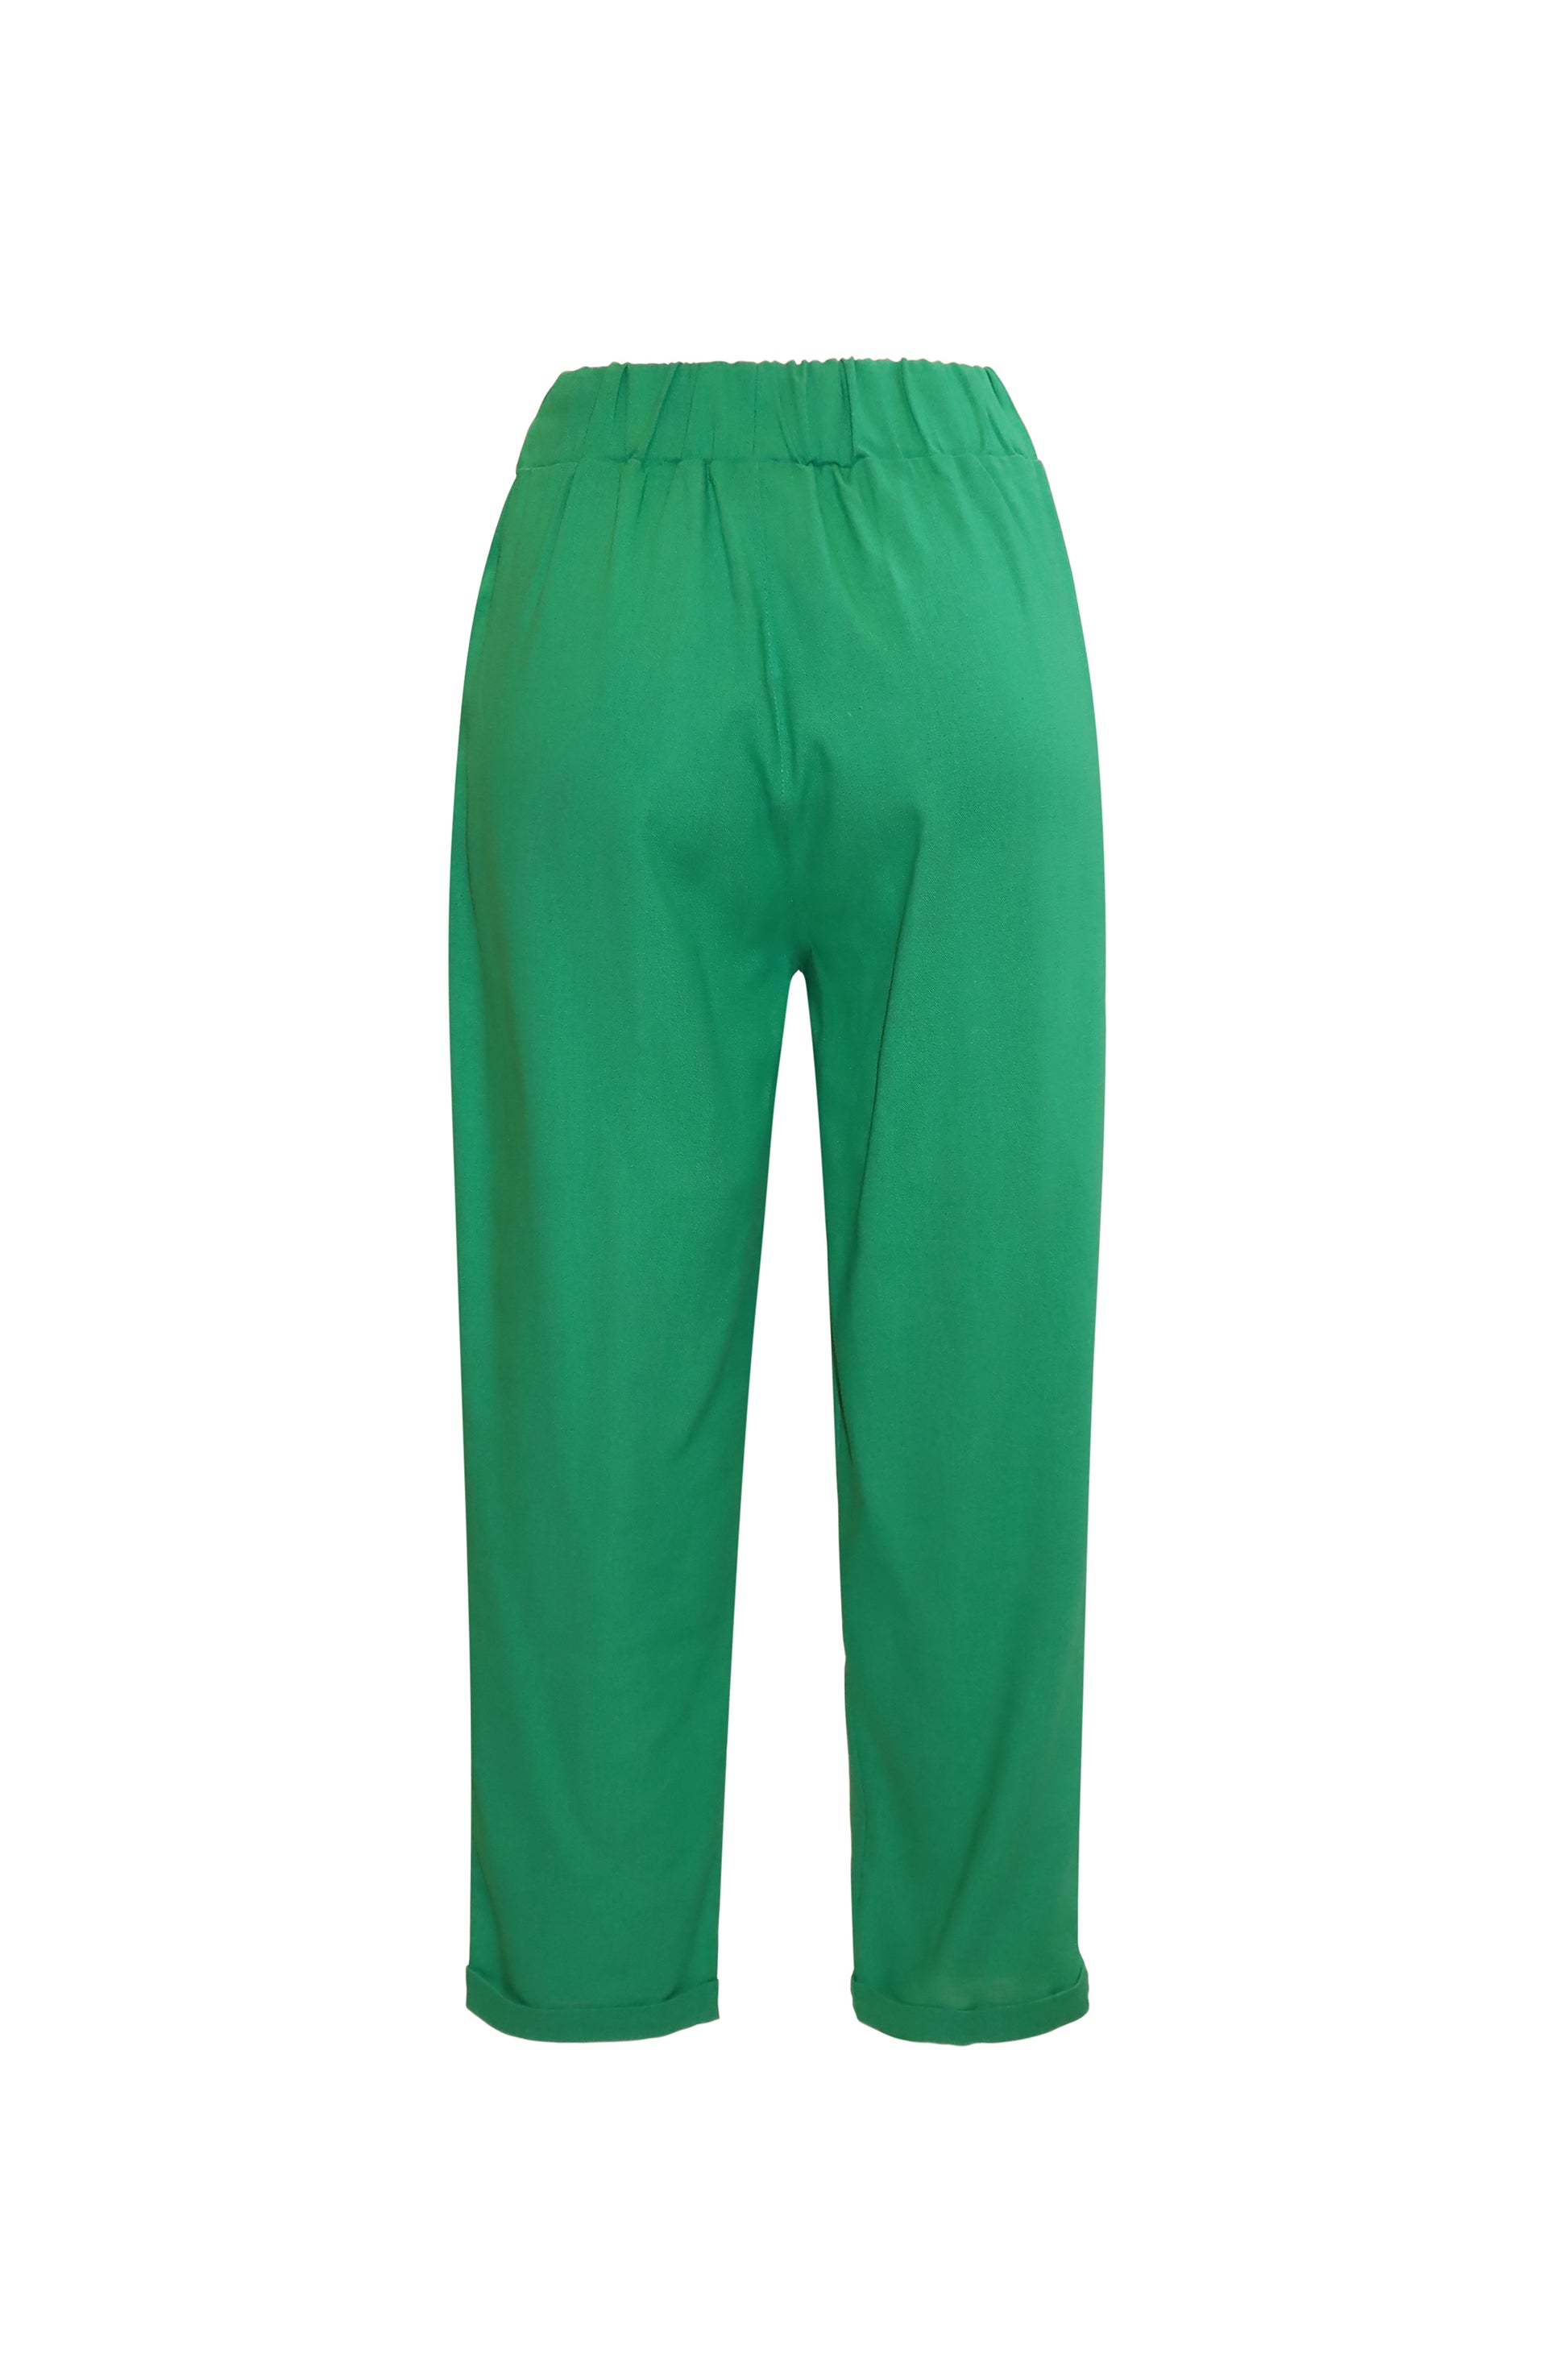 Cotton Green Pants by Shabeeg